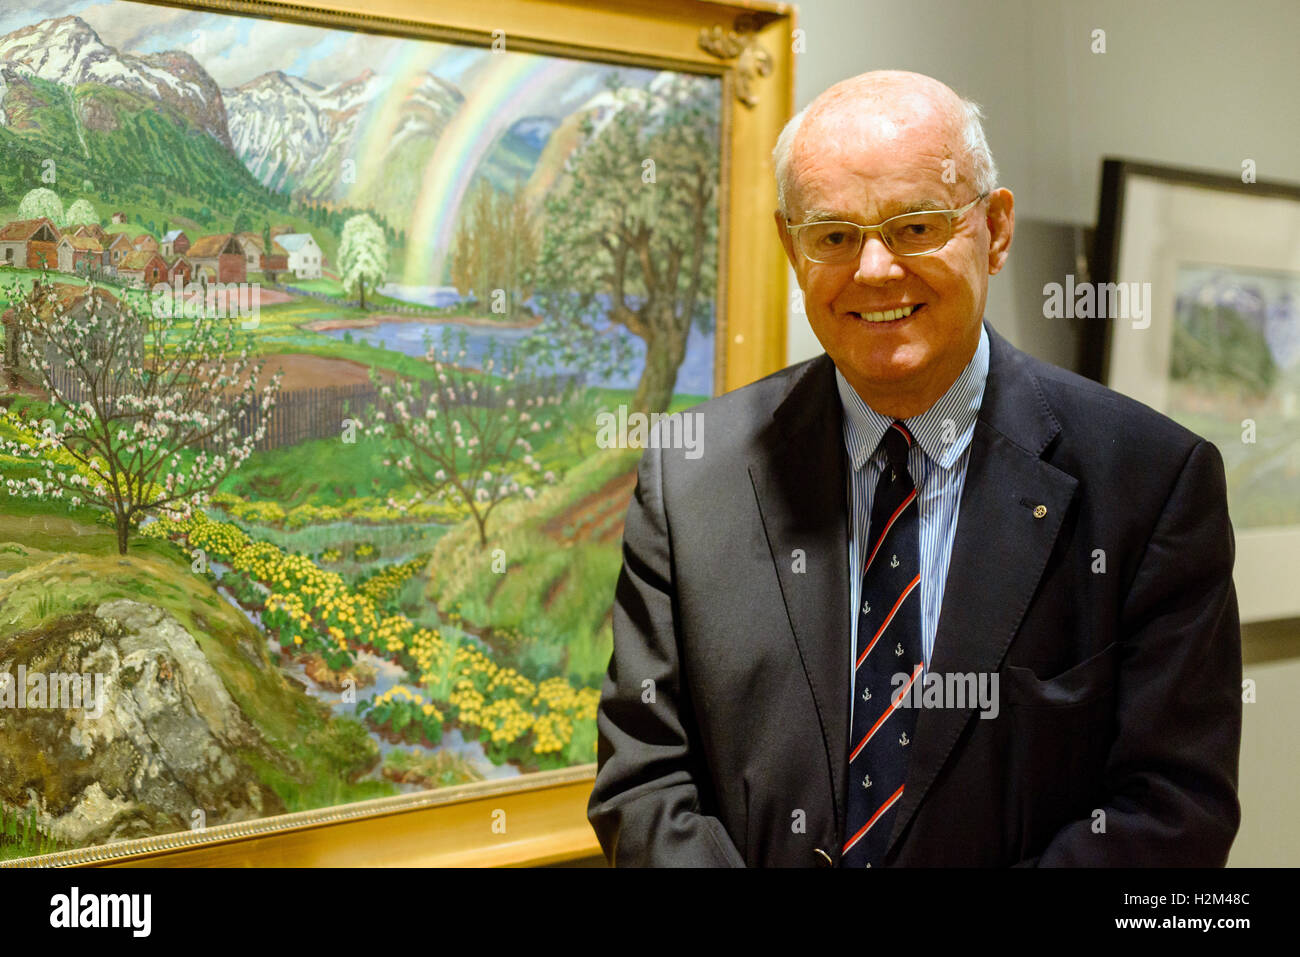 Emden, Germany. 30th Sep, 2016. Folkert Hinrichs, chairman of the board of the Kunsthalle Emden, Eske Nannen, stands in the exhibition 'Nikolai Astrup: Norway, ' lies in the Kunsthalle in Emden, Germany, 30 September 2016. The painter Nikolai Astrup (1880-1928) achieved fame and recognition in Norway with large oil paintings and technically elaborate wood cuts. However, his pieces were barely seen internationally. The Emden Kunsthalle is now showing a comprehensive exhibition with 150 pictures for the first time. Photo: THORSTEN HELMERICHS/dpa/Alamy Live News Stock Photo